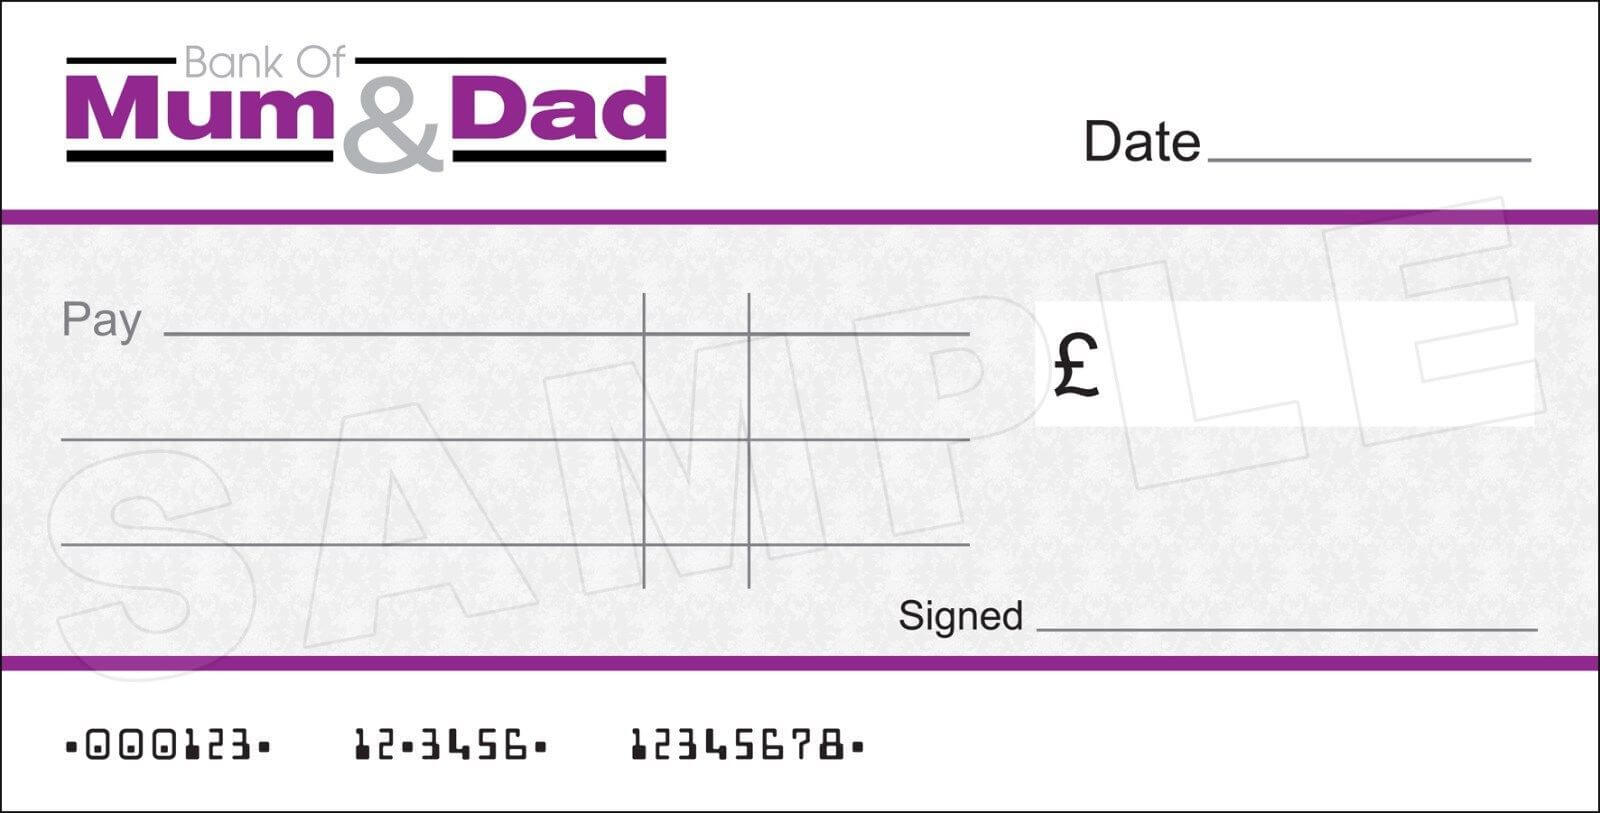 Details About Large Blank Bank Of Mum & Dad Cheque | Dads With Regard To Blank Cheque Template Uk